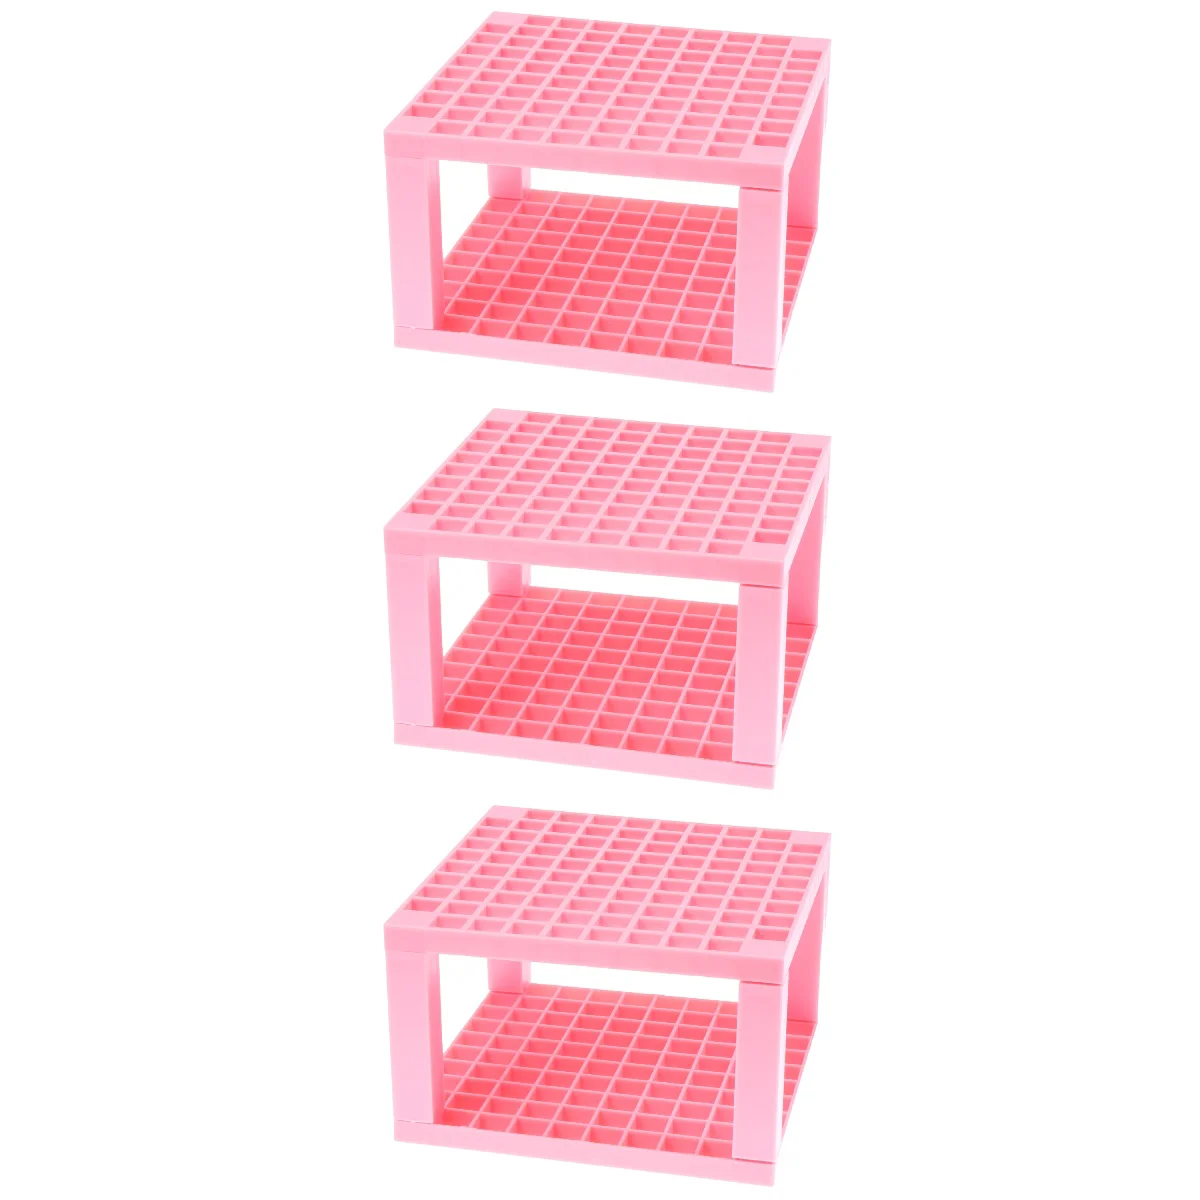 

3pcs 96 Holes Multi-funltional Detachable Holder Desktop Display Stand Organizer for Drawing Markers Brushes